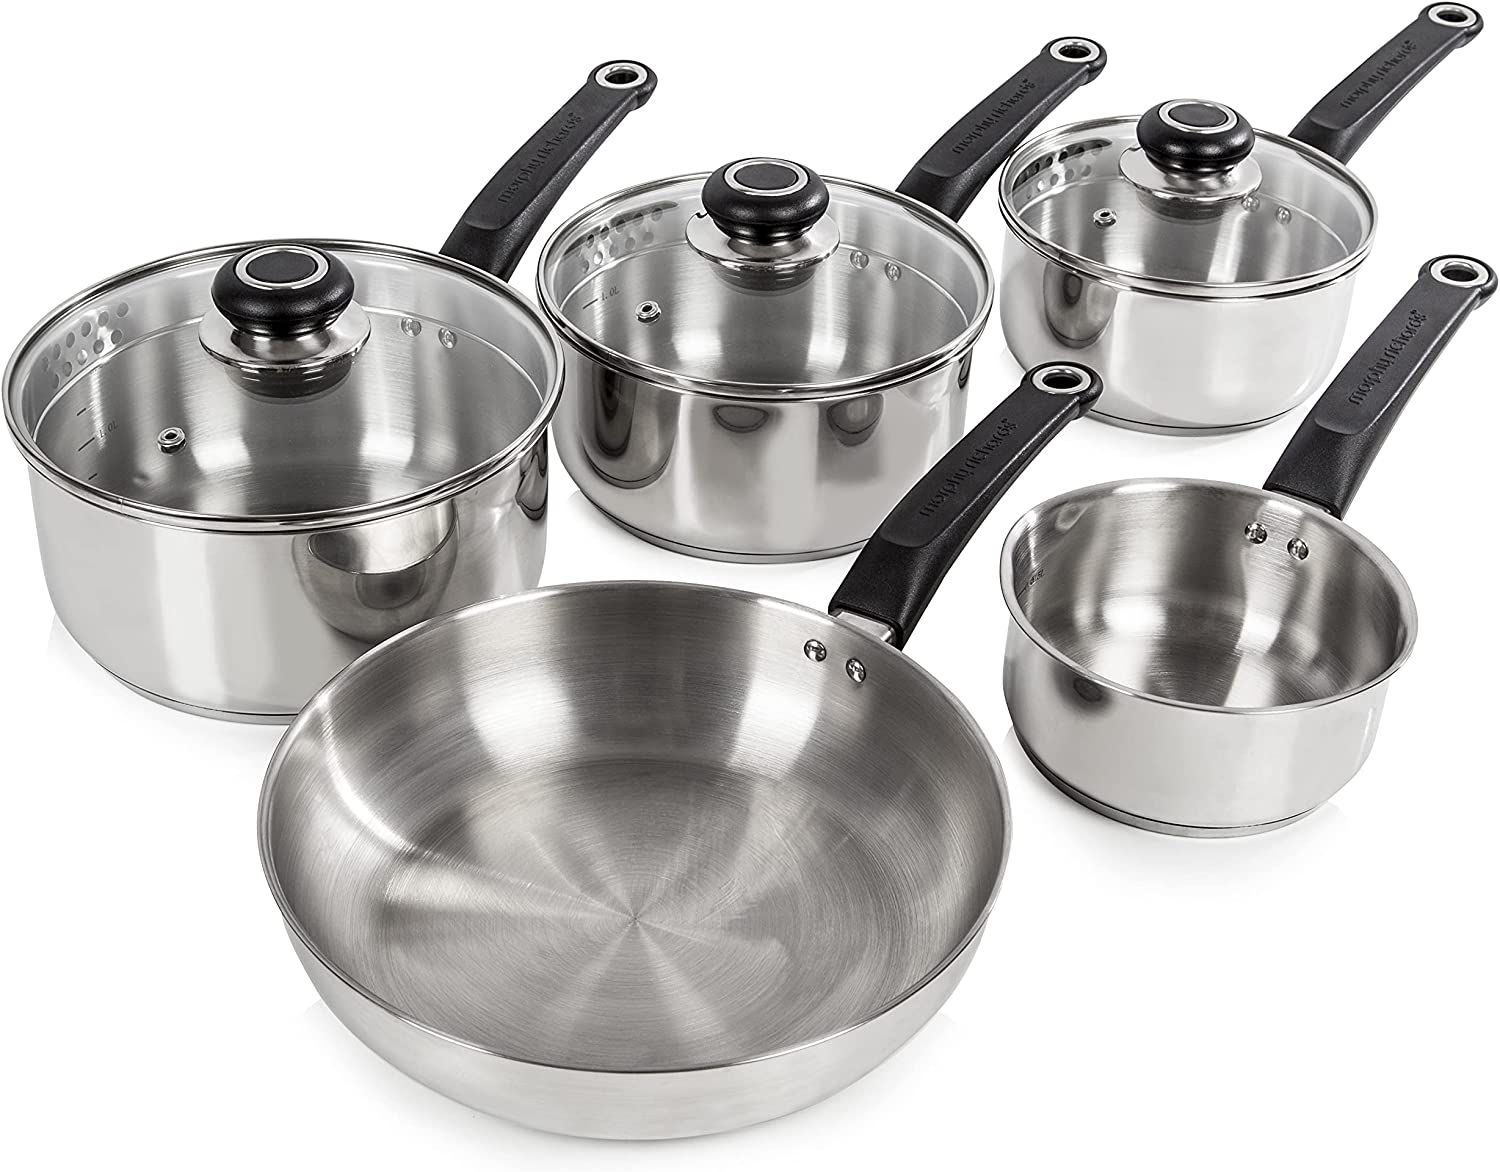 Morphy Richards Equip Stainless Steel Saucepan Set, 5 Piece Stainless Steel